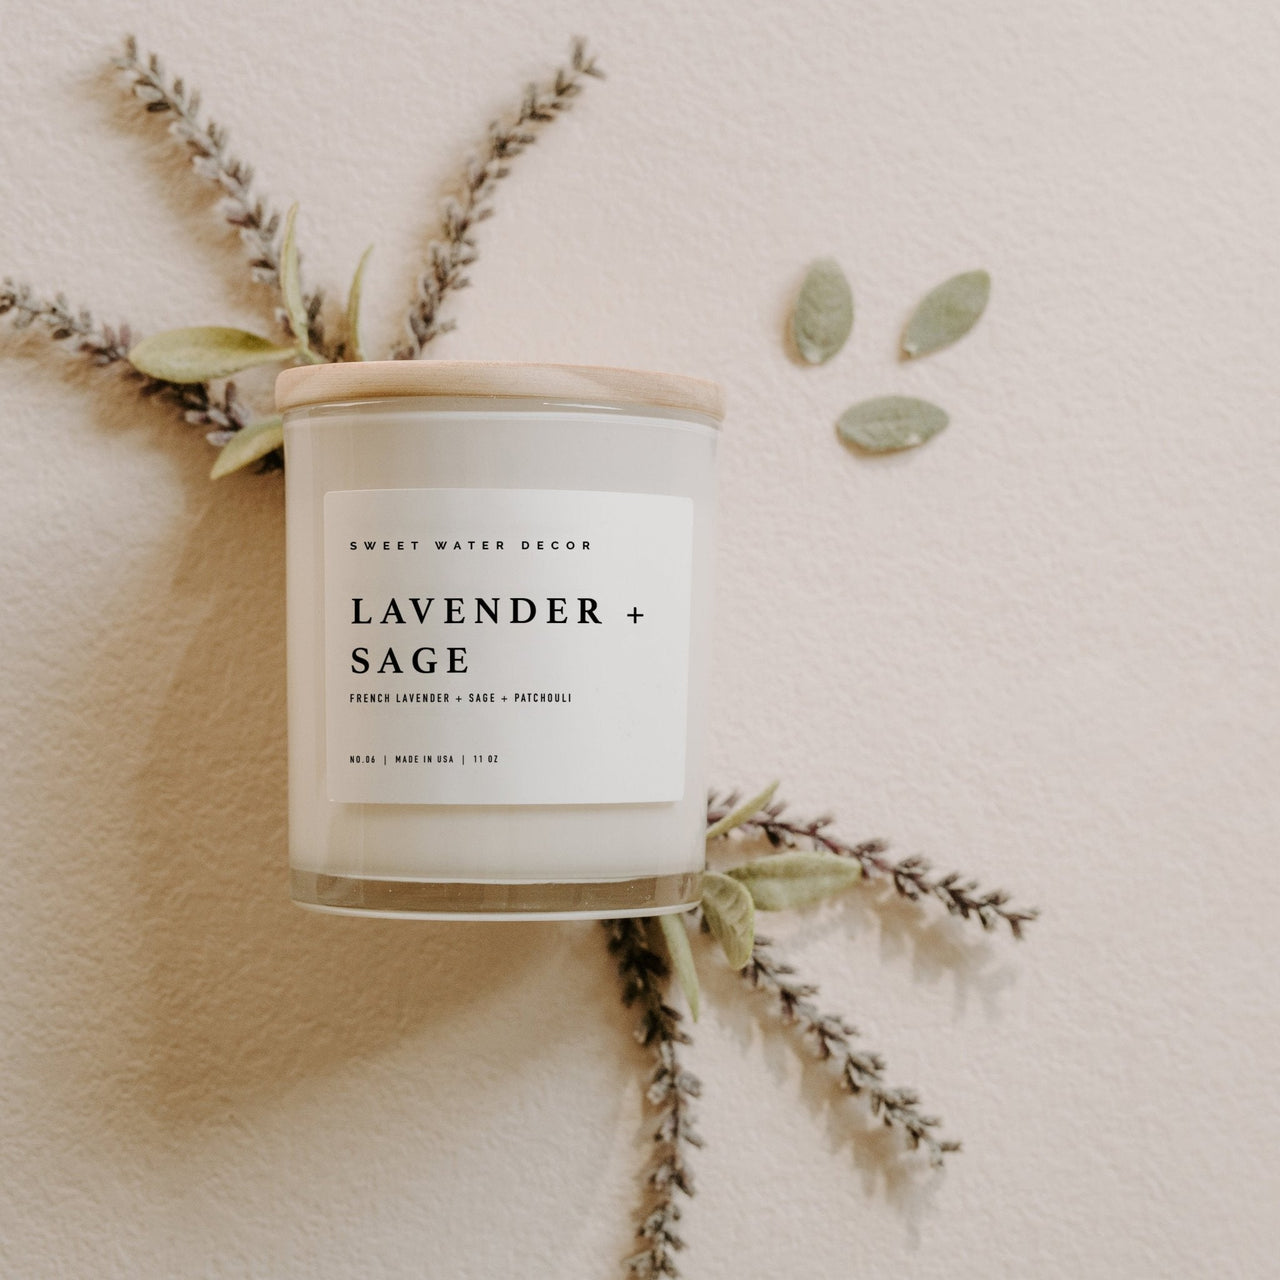 Lavender and Sage Soy Candle - White Jar - 11 oz - Tony's Home Furnishings